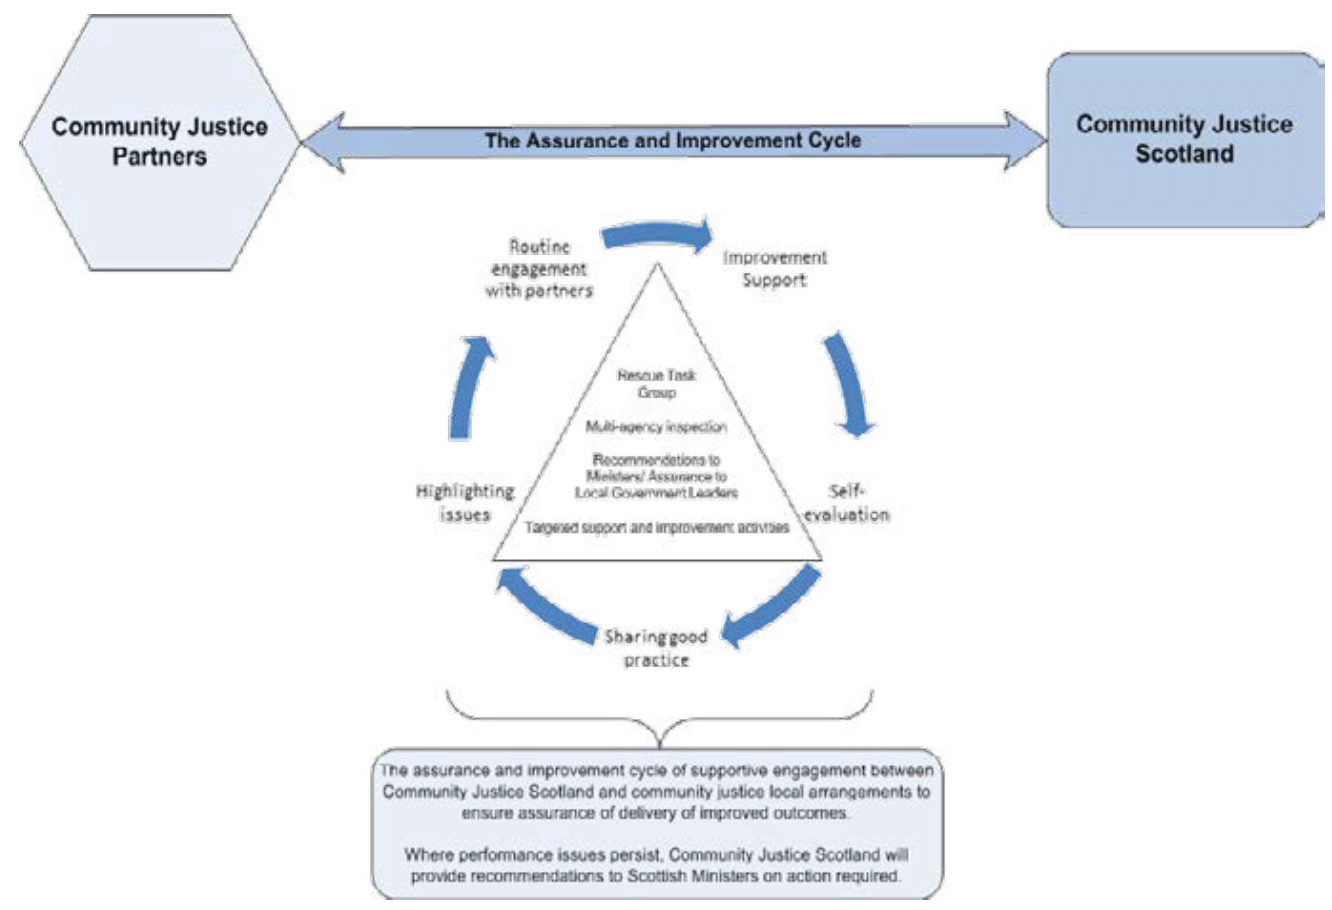 Fig 3: The assurance and improvement cycle